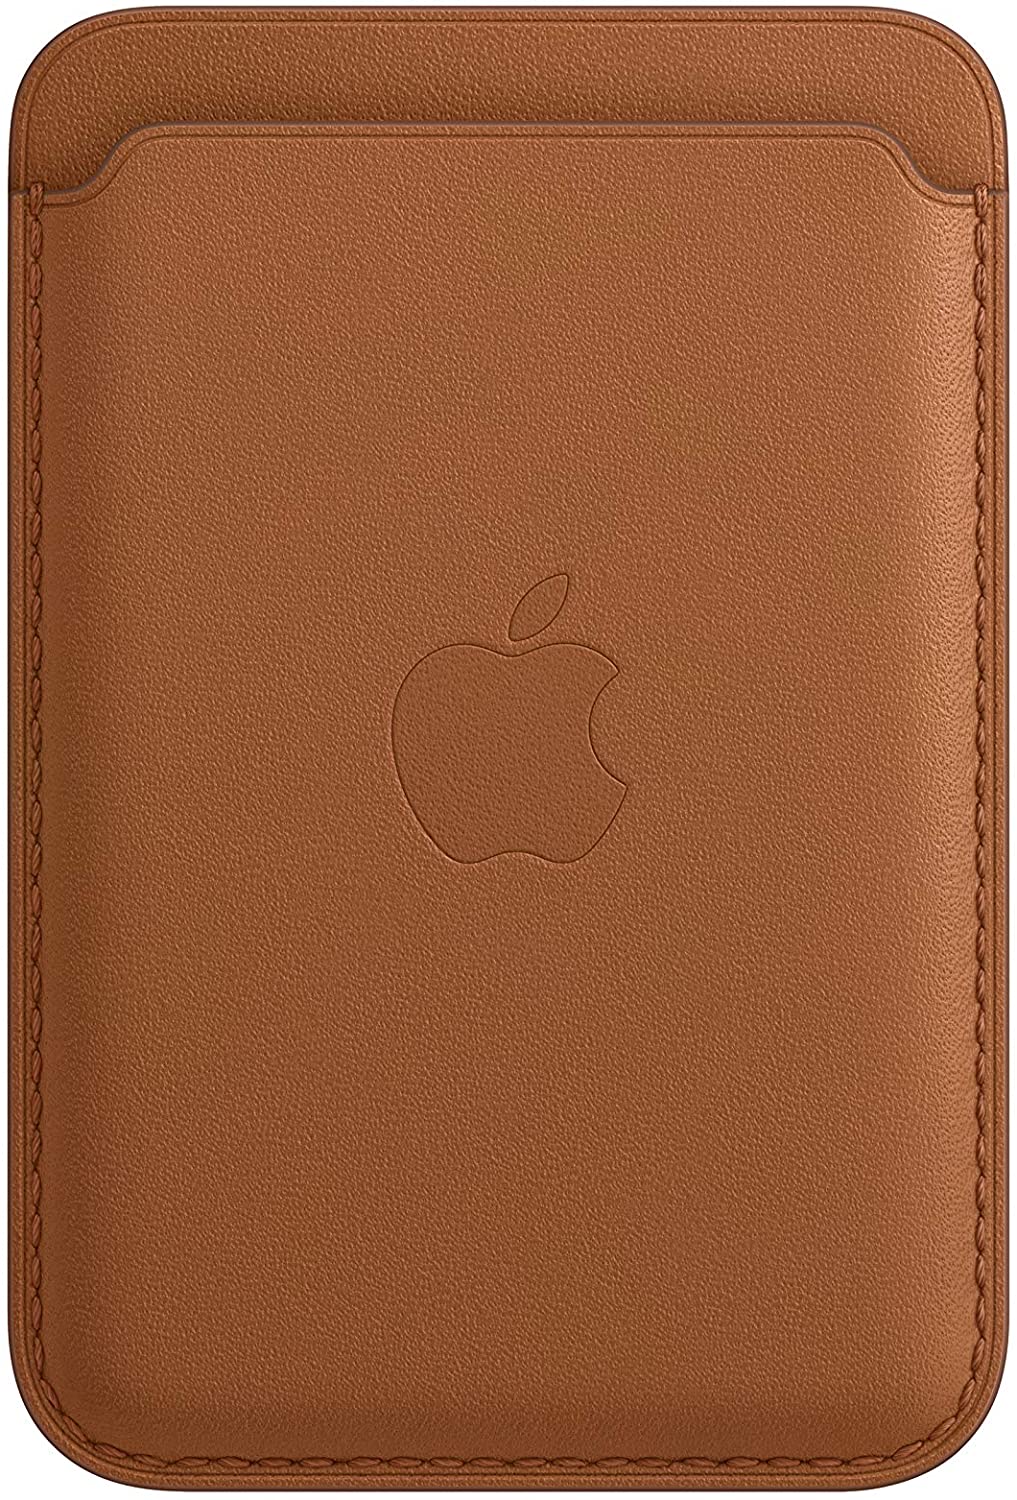 Apple Leather Wallet with MagSafe for iPhone, MHLT3ZM/A - Saddle Brown (Certified Refurbished)